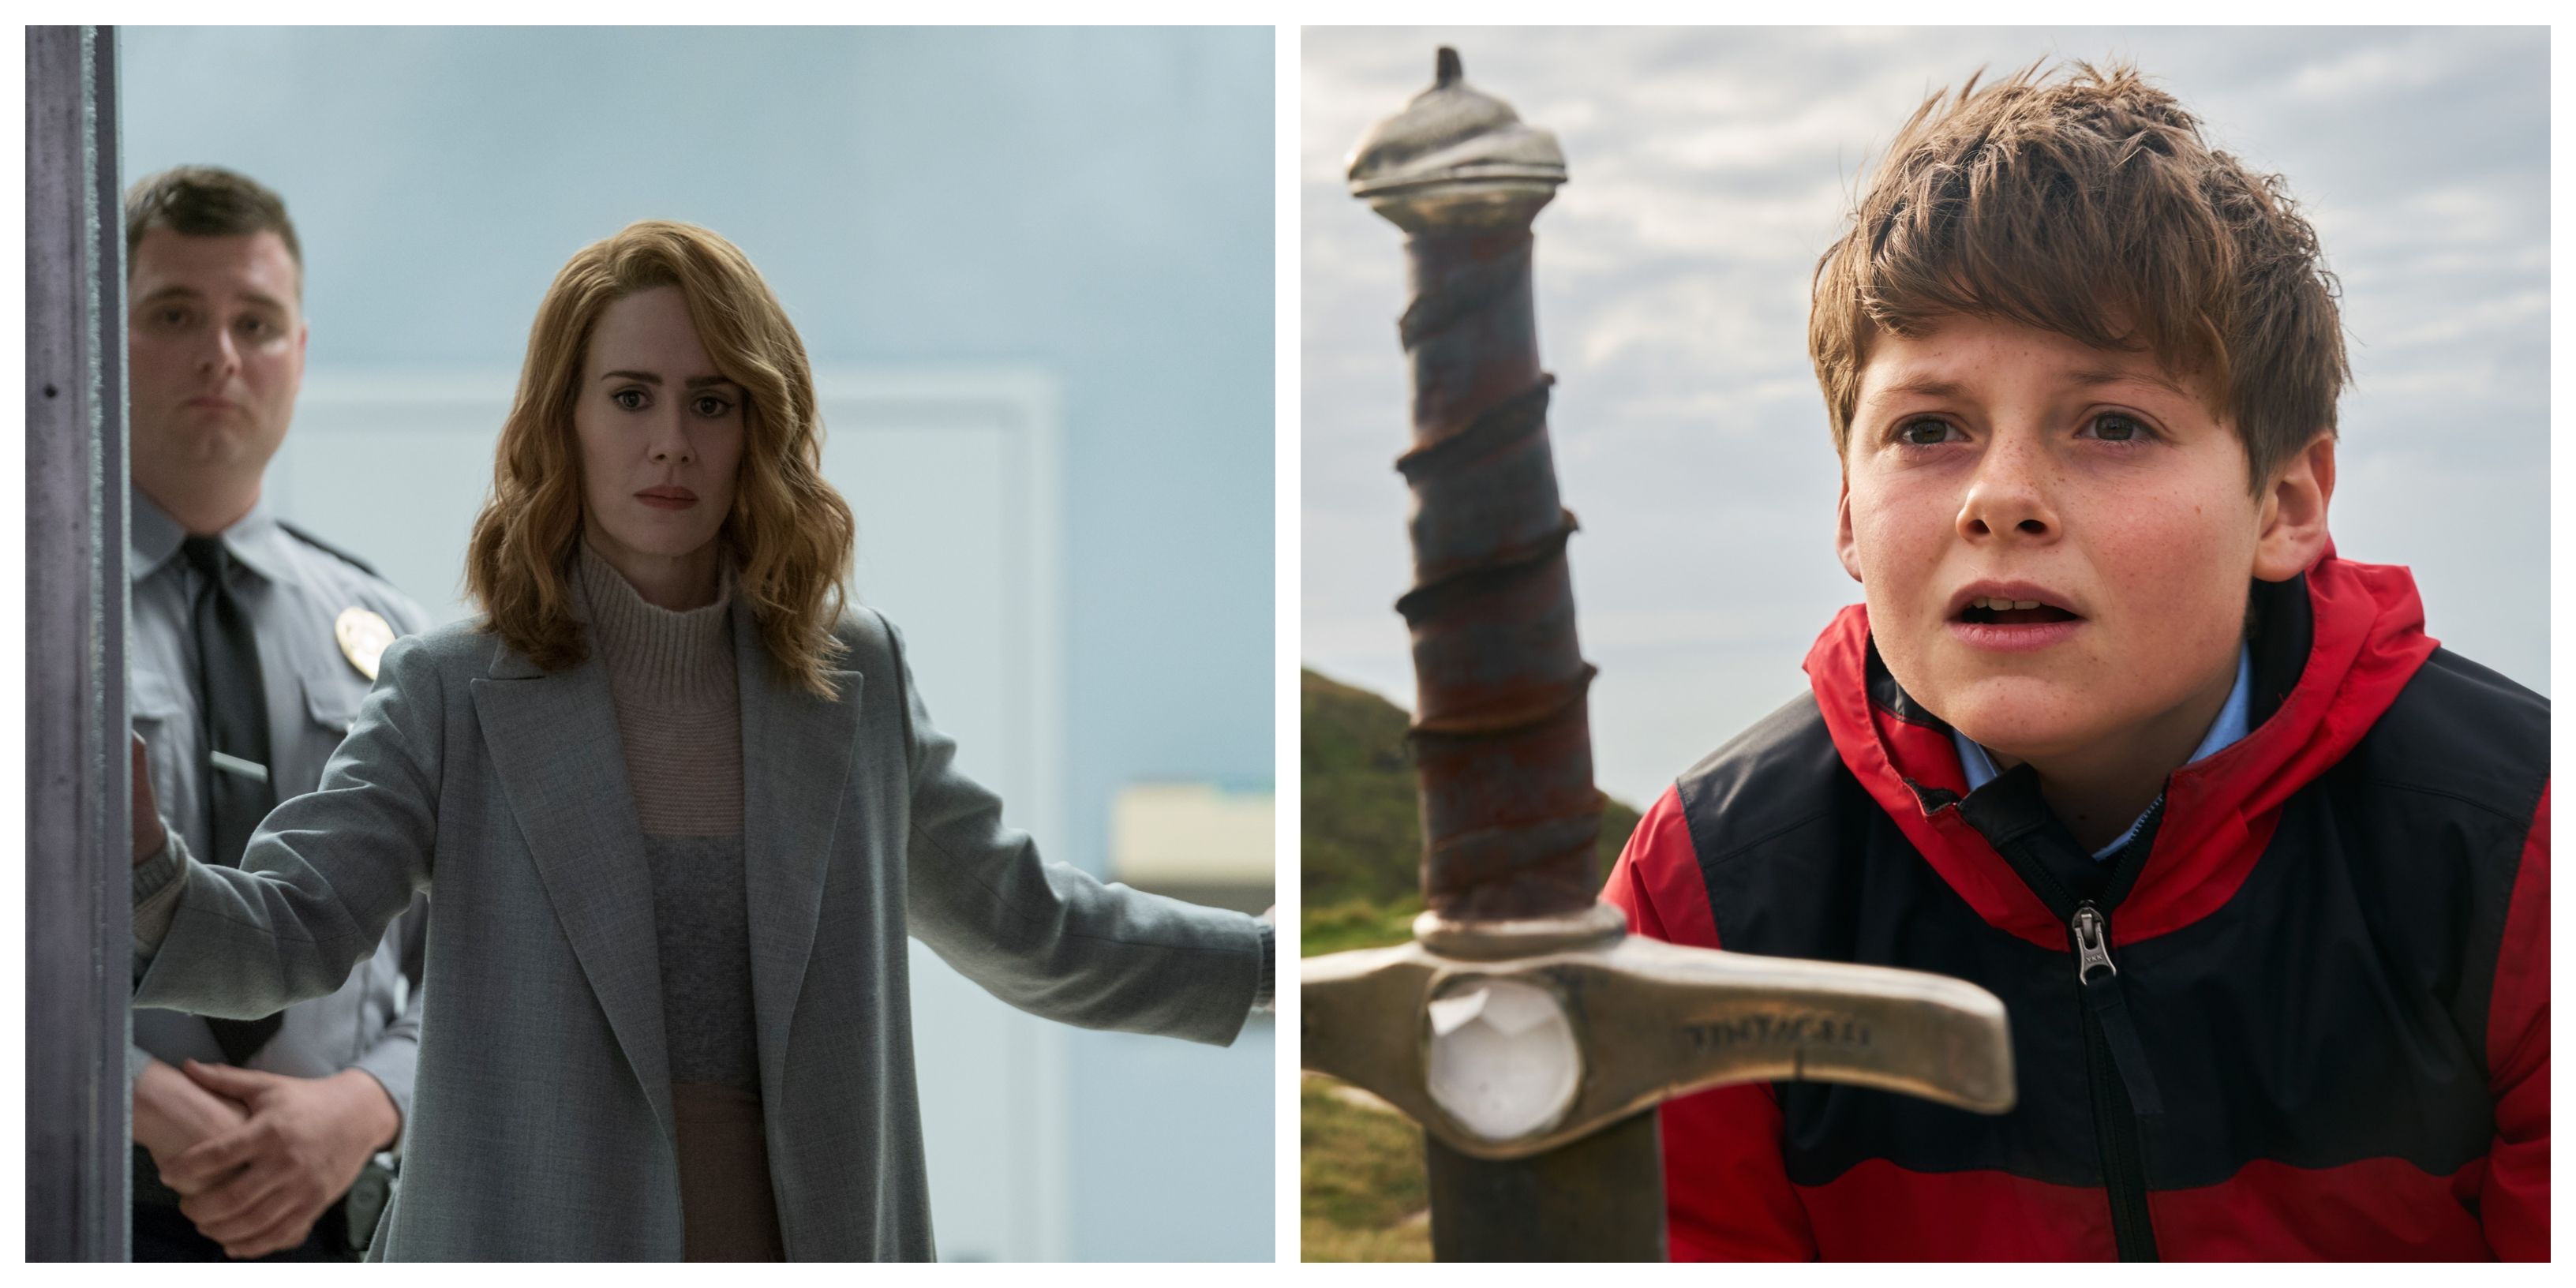 Glass Sarah Paulson The Kid Who Would Be King Louis Ashbourne Serkis